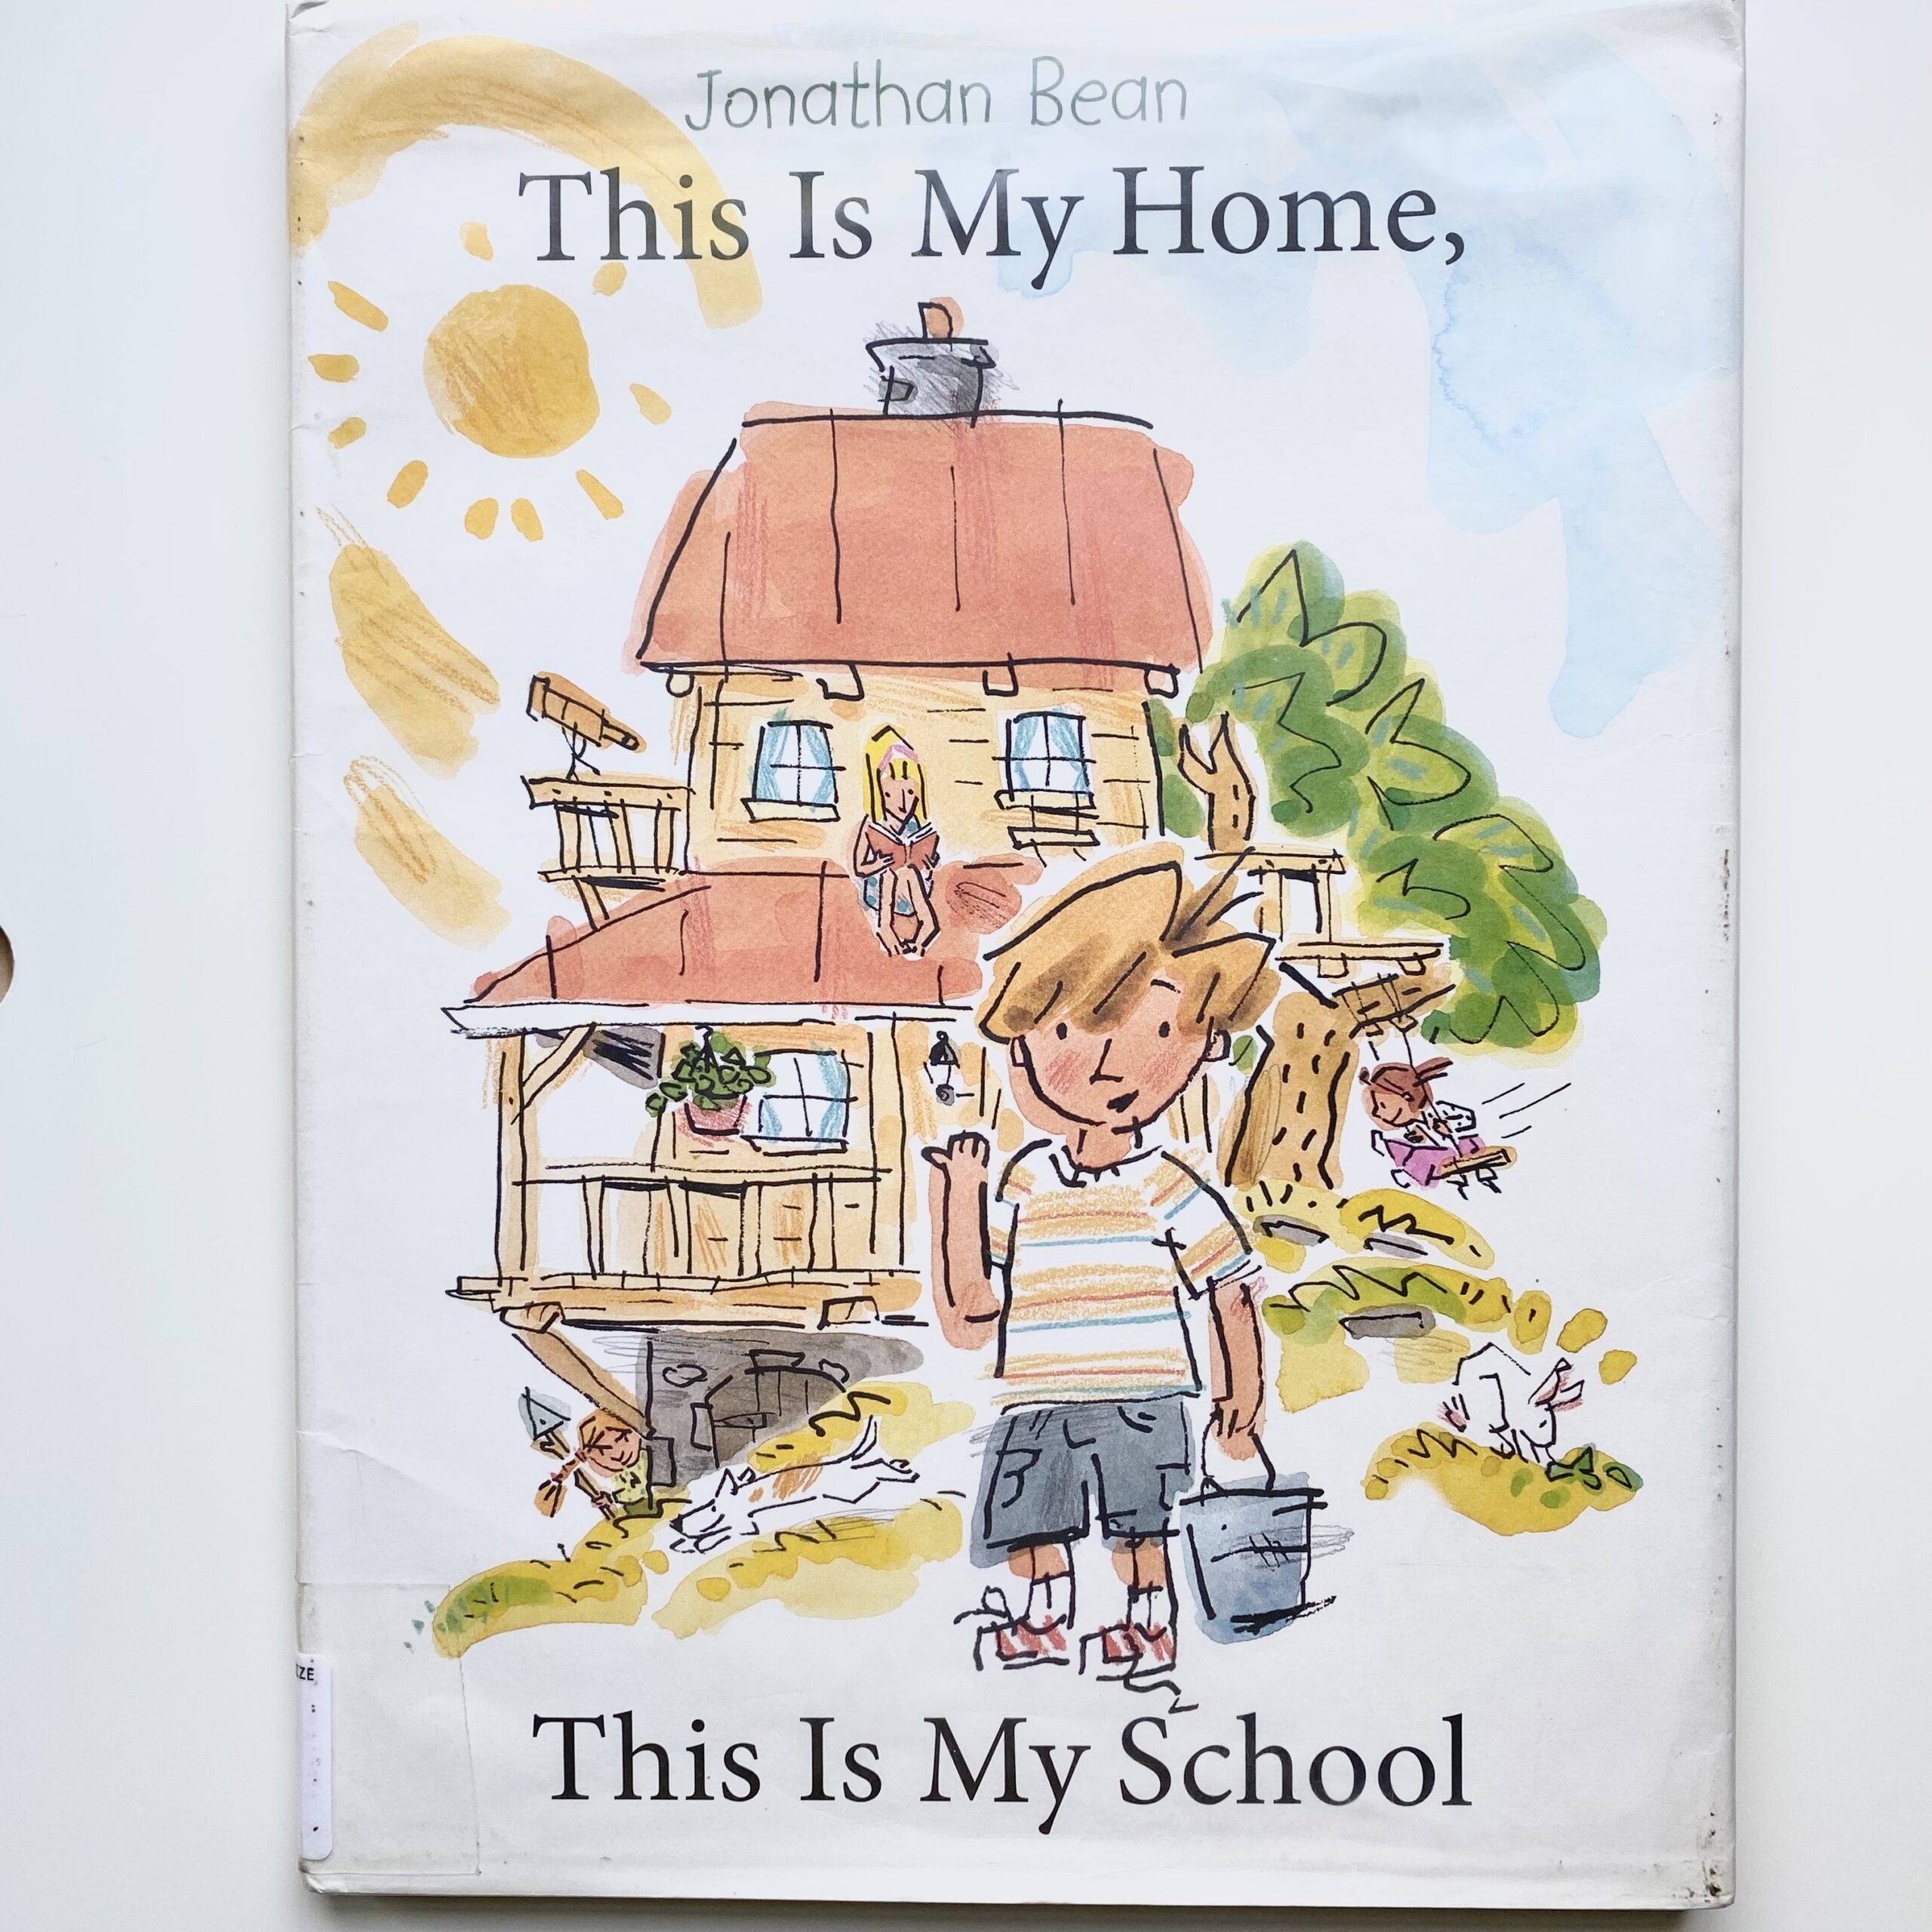 This is My Home, This is My School picture book by Jonathon Bean